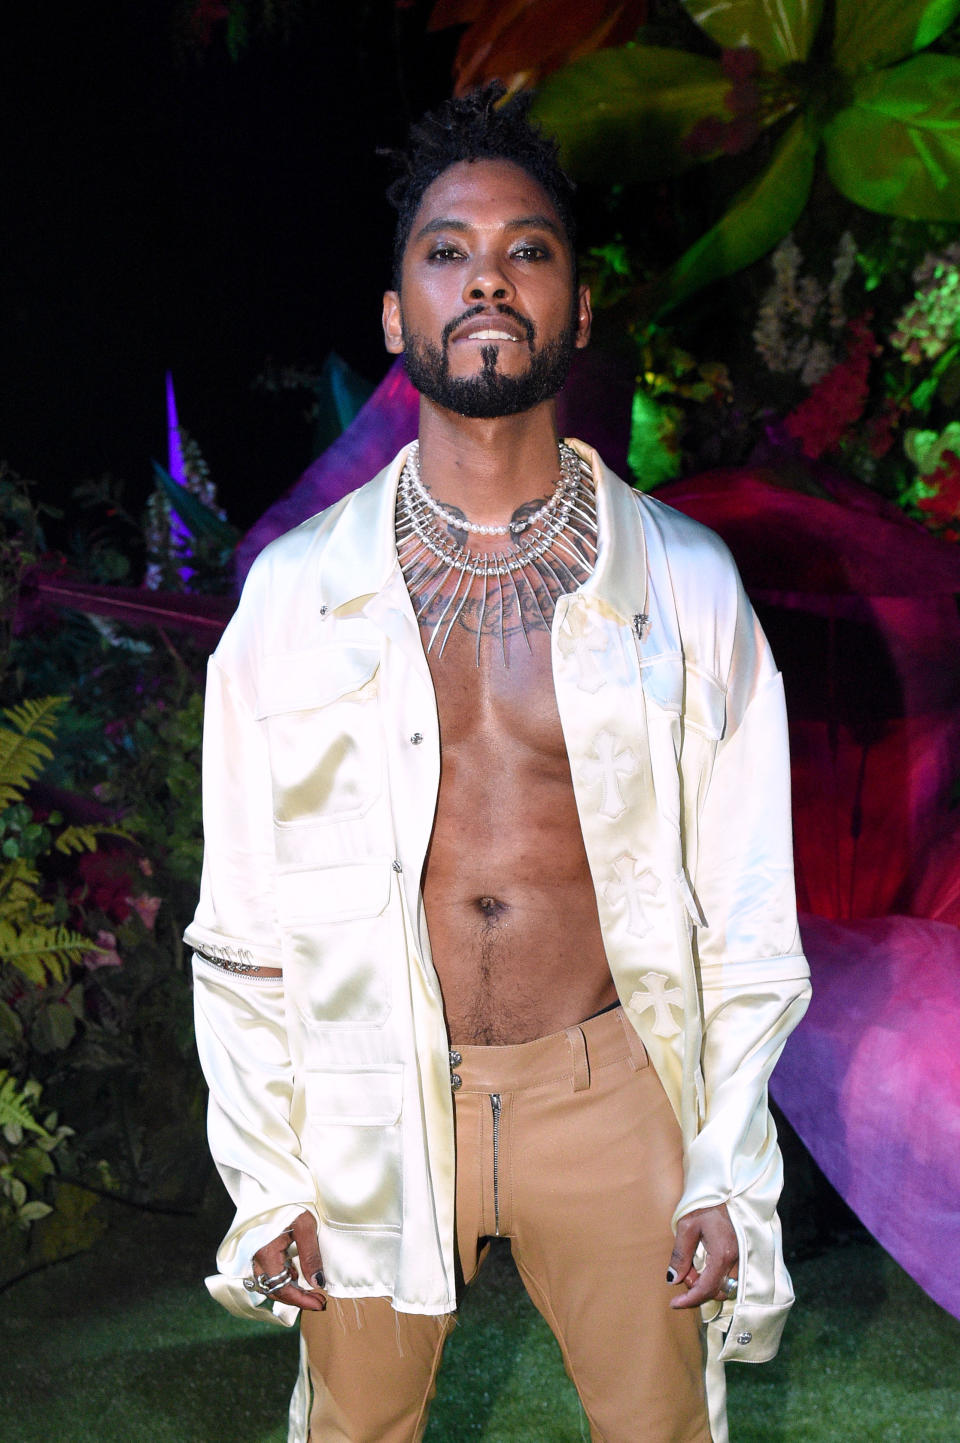   Kevin Mazur / Getty Images for Savage X Fenty Show Vol. 2 Presented by Amazon Prime Video